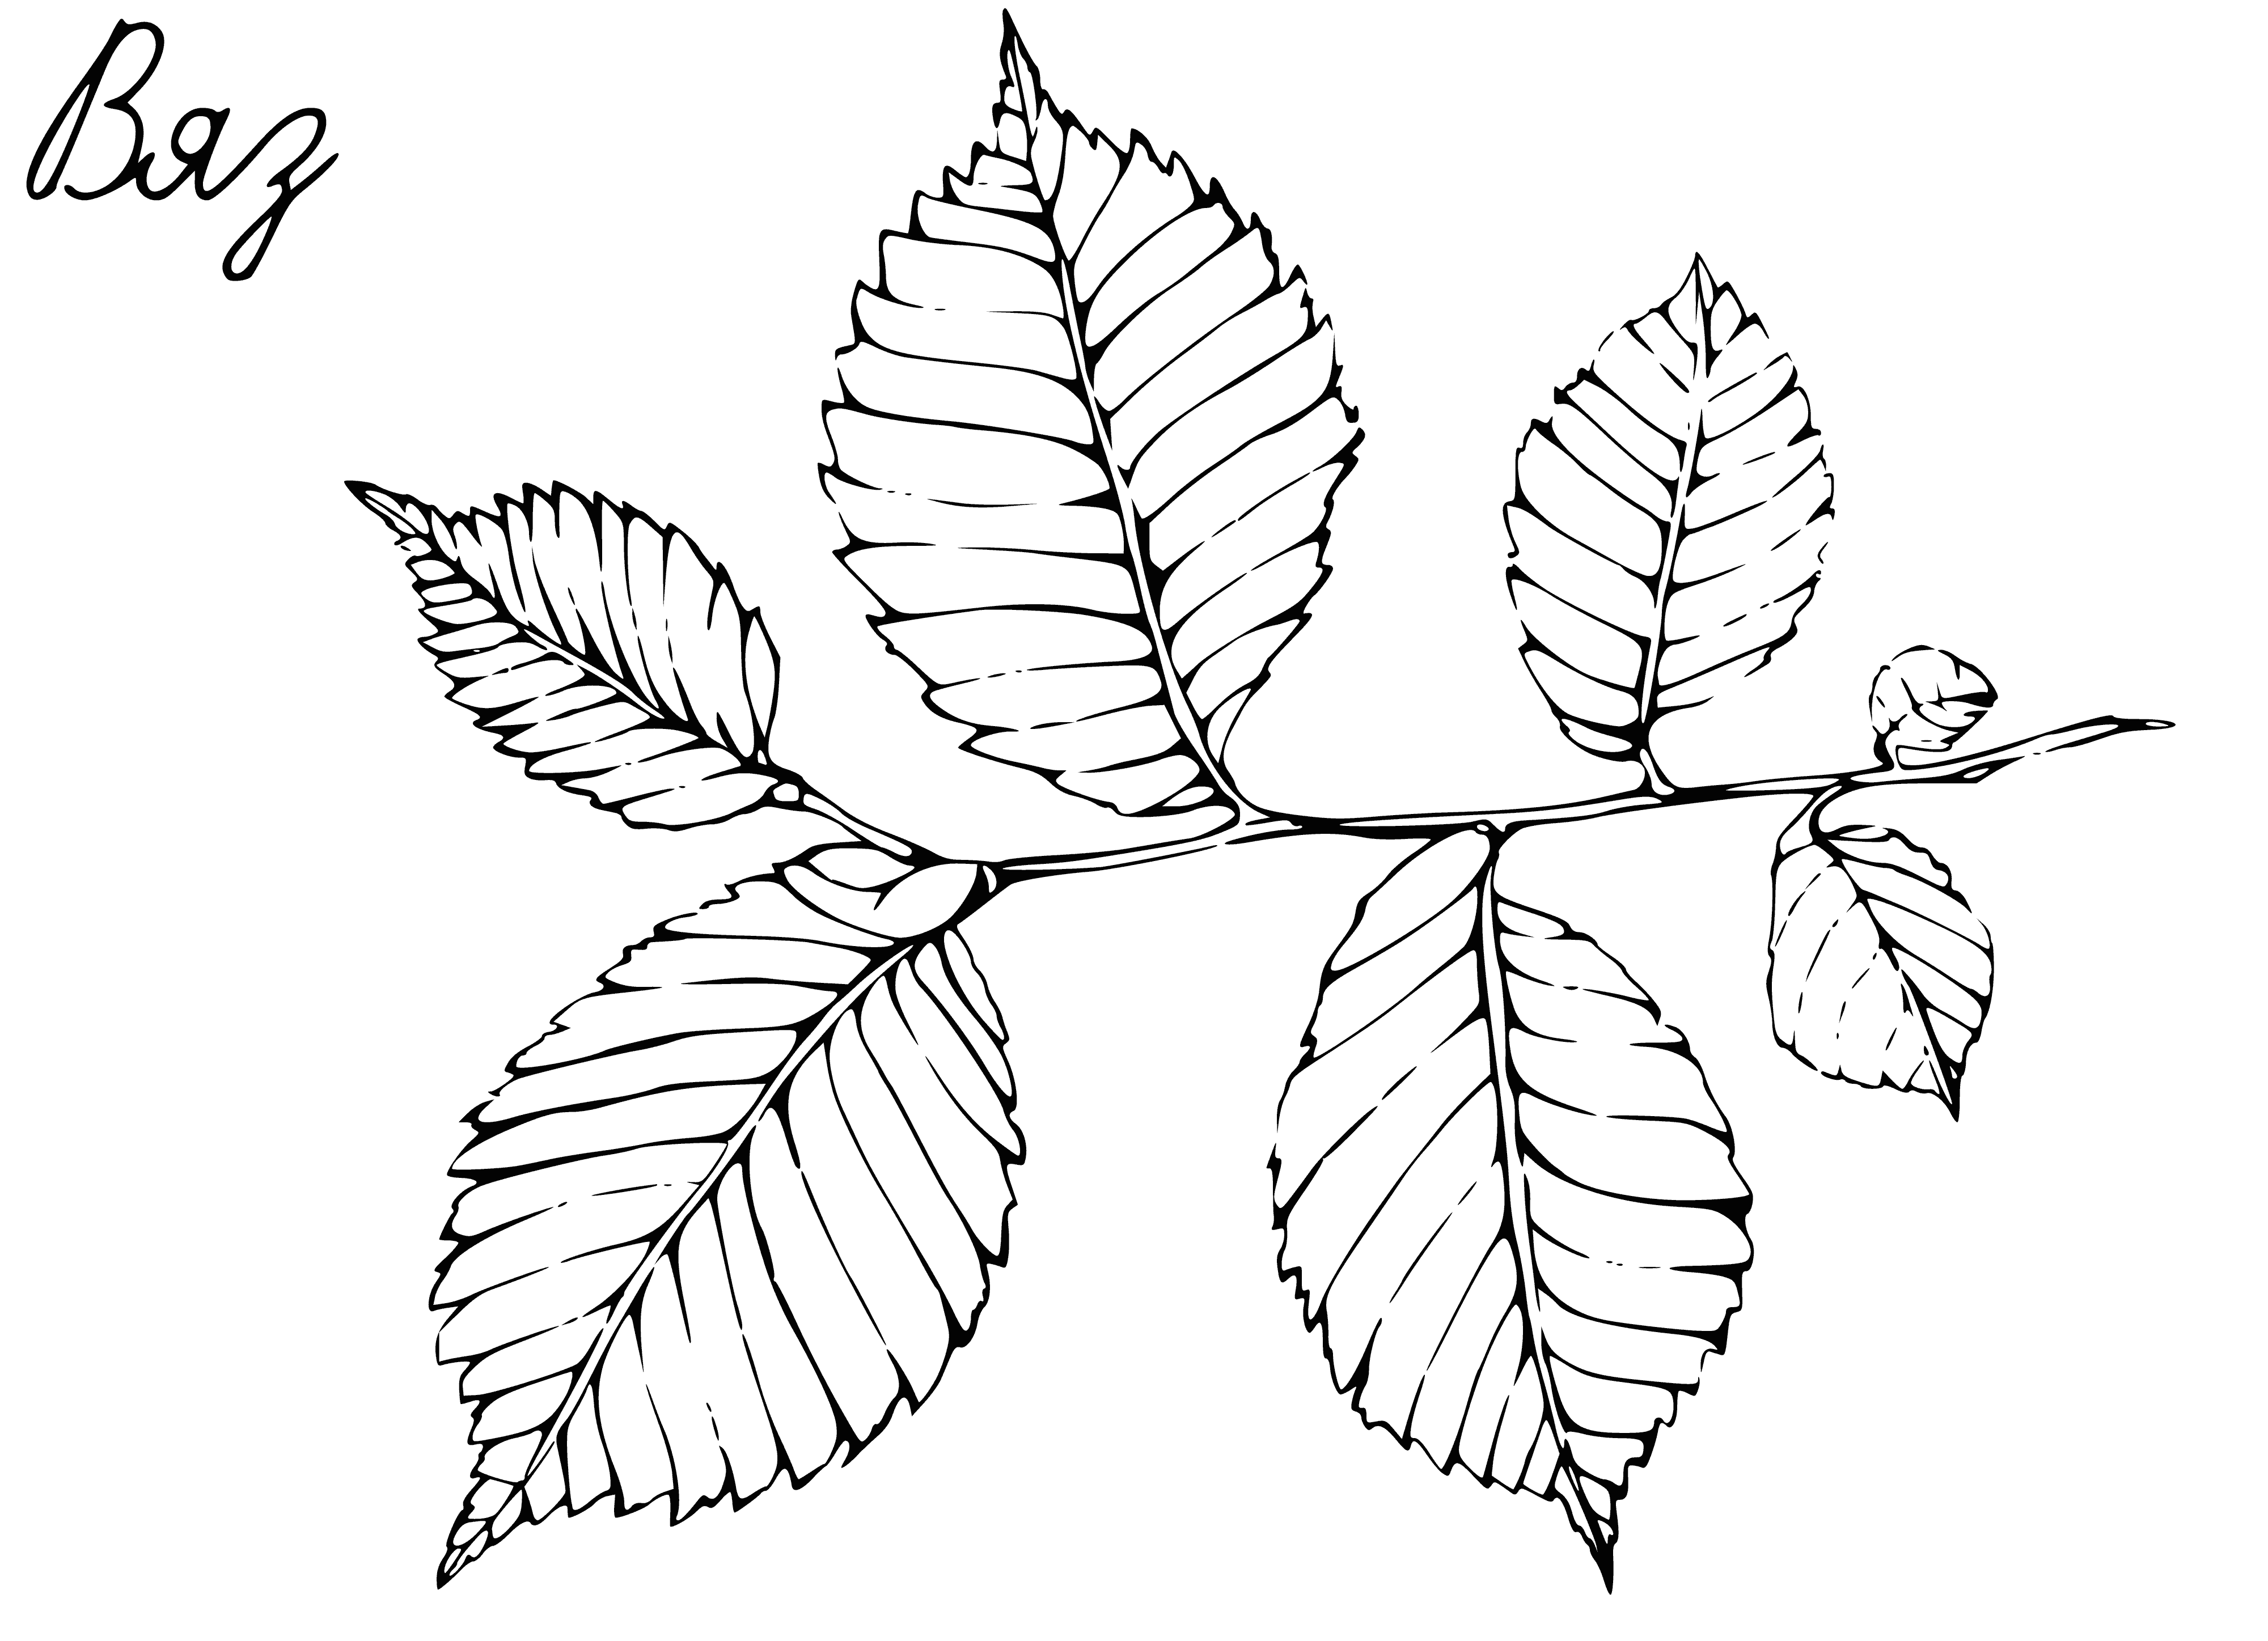 Elm coloring page